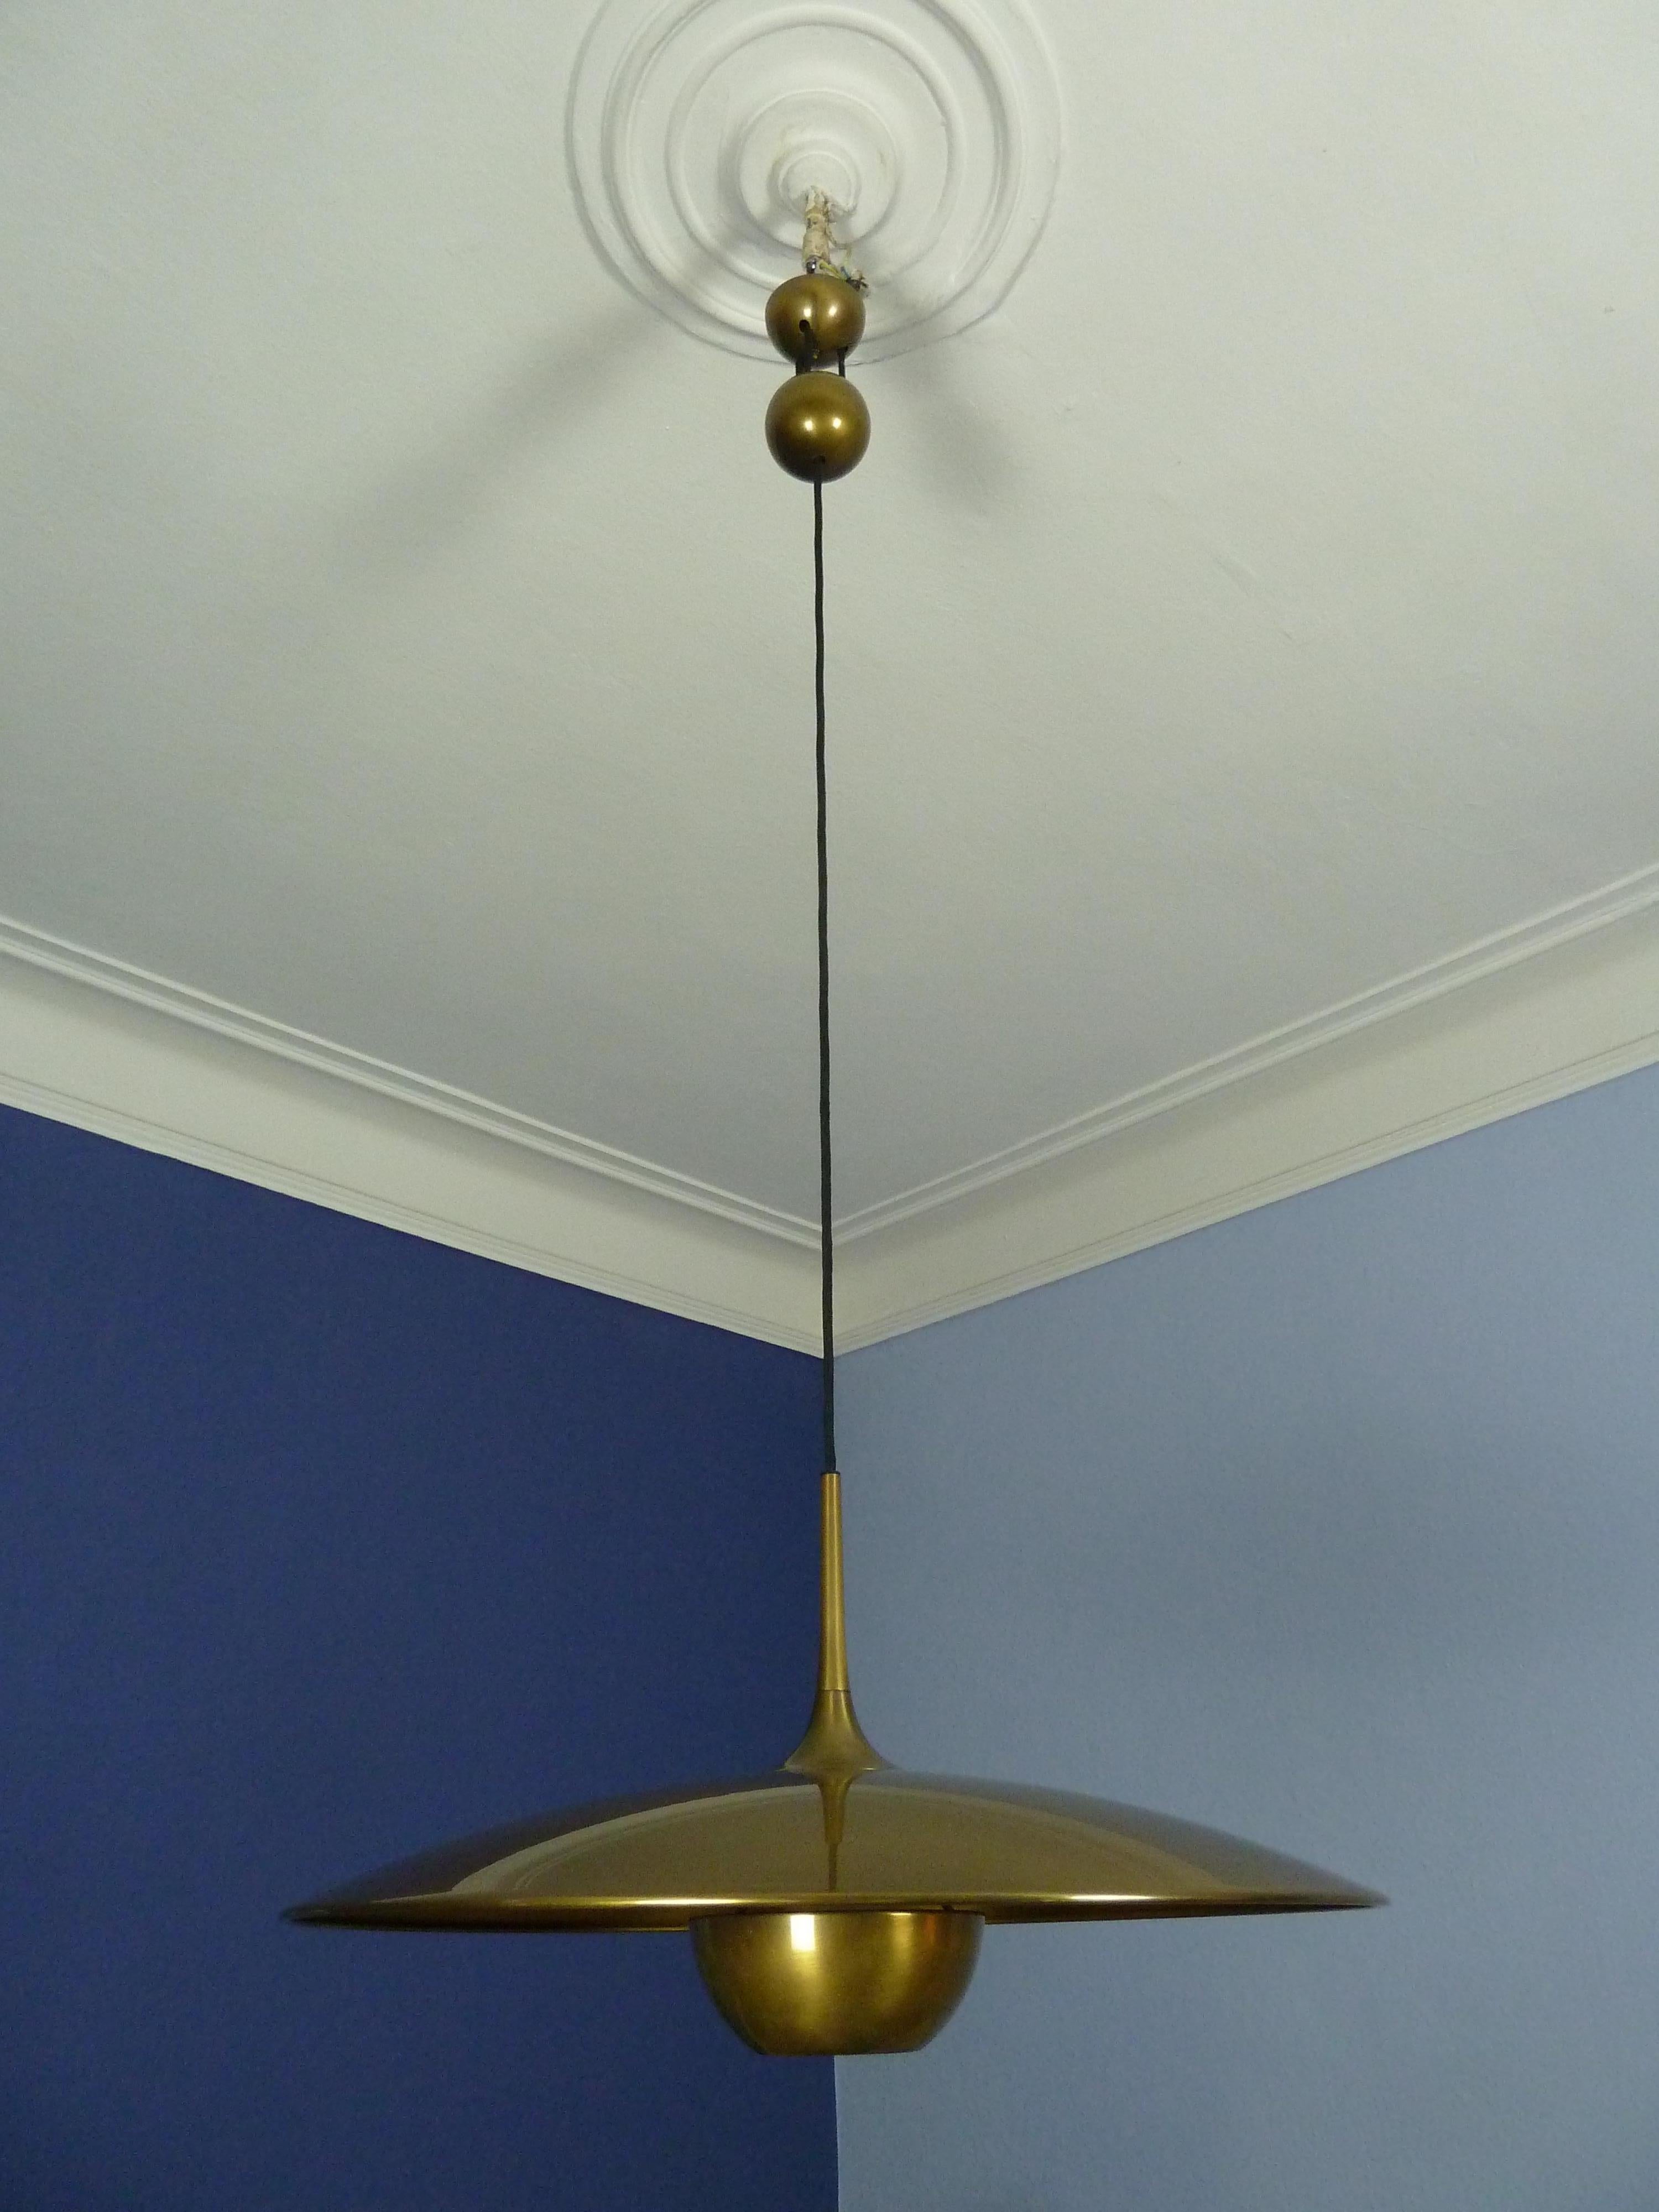 Mid-Century Modern Adjustable Brass Pendant Onos55 by Florian Schulz with a Central Counterweight